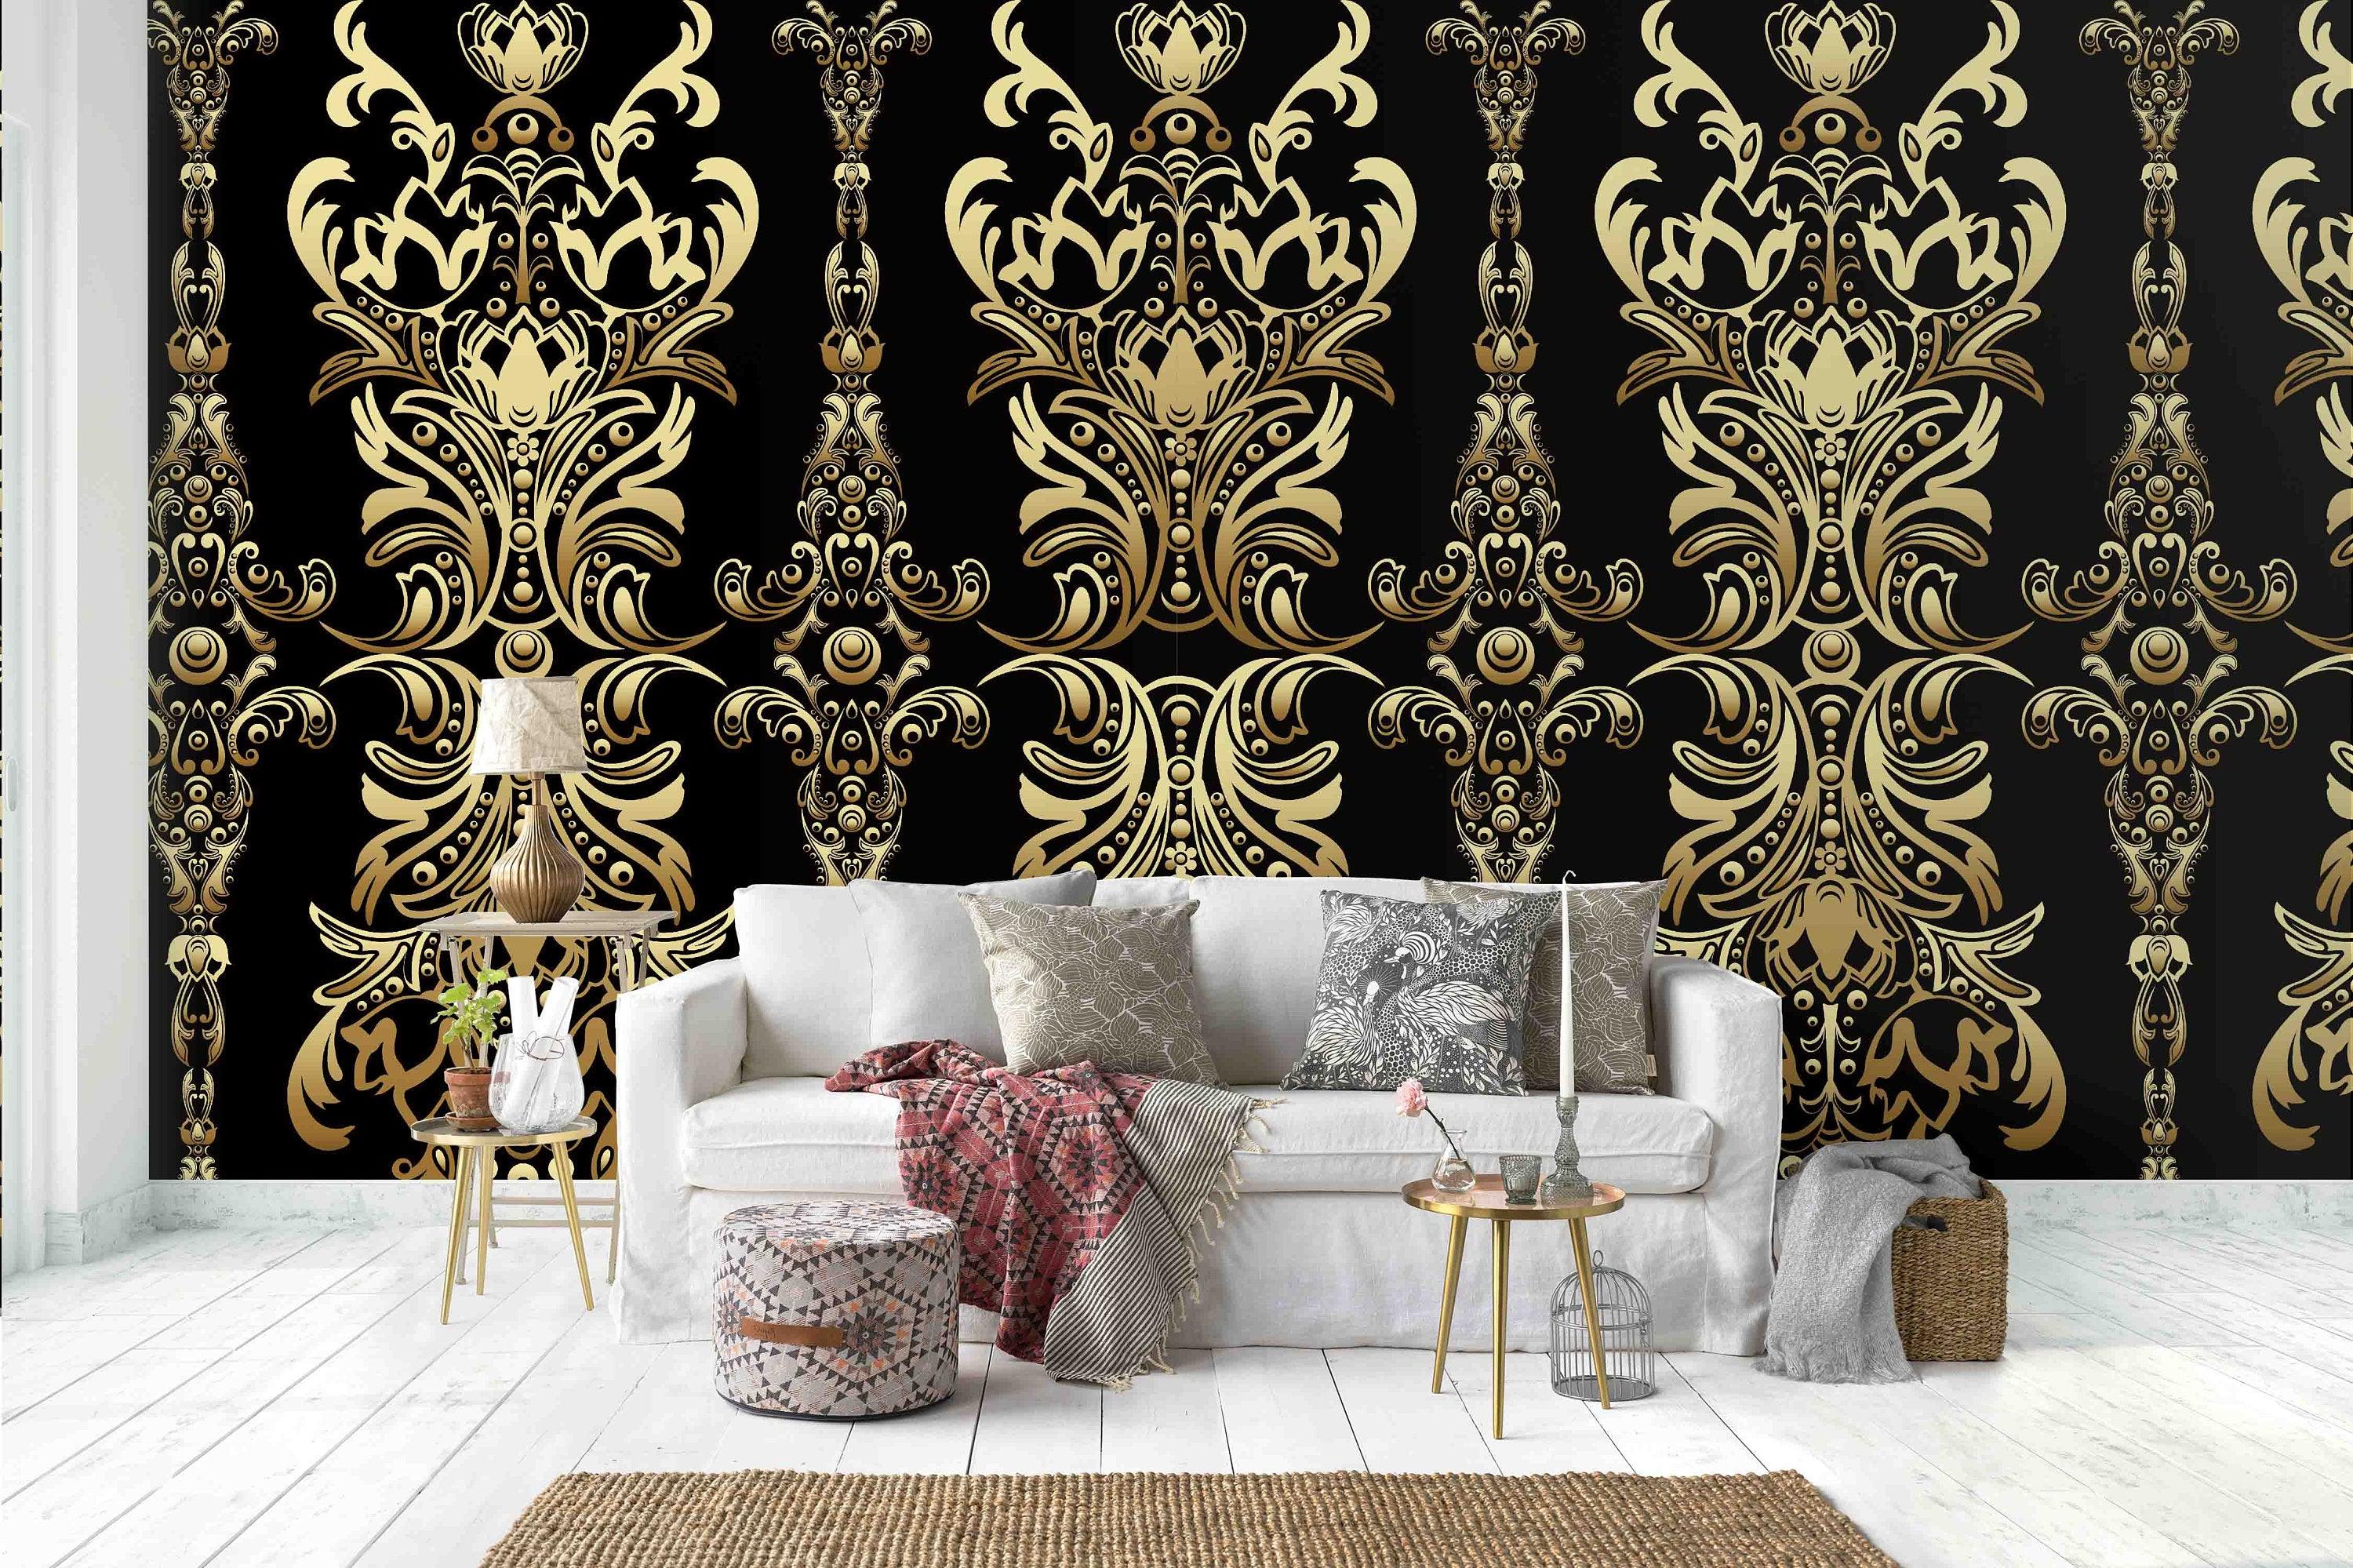 3D Luxury design,Decoration,Gold damask,Oriental ornament Wallpaper,Removable Self Adhesive Wallpaper, Wall Mural,Vintage art,Peel and Stick- Jess Art Decoration